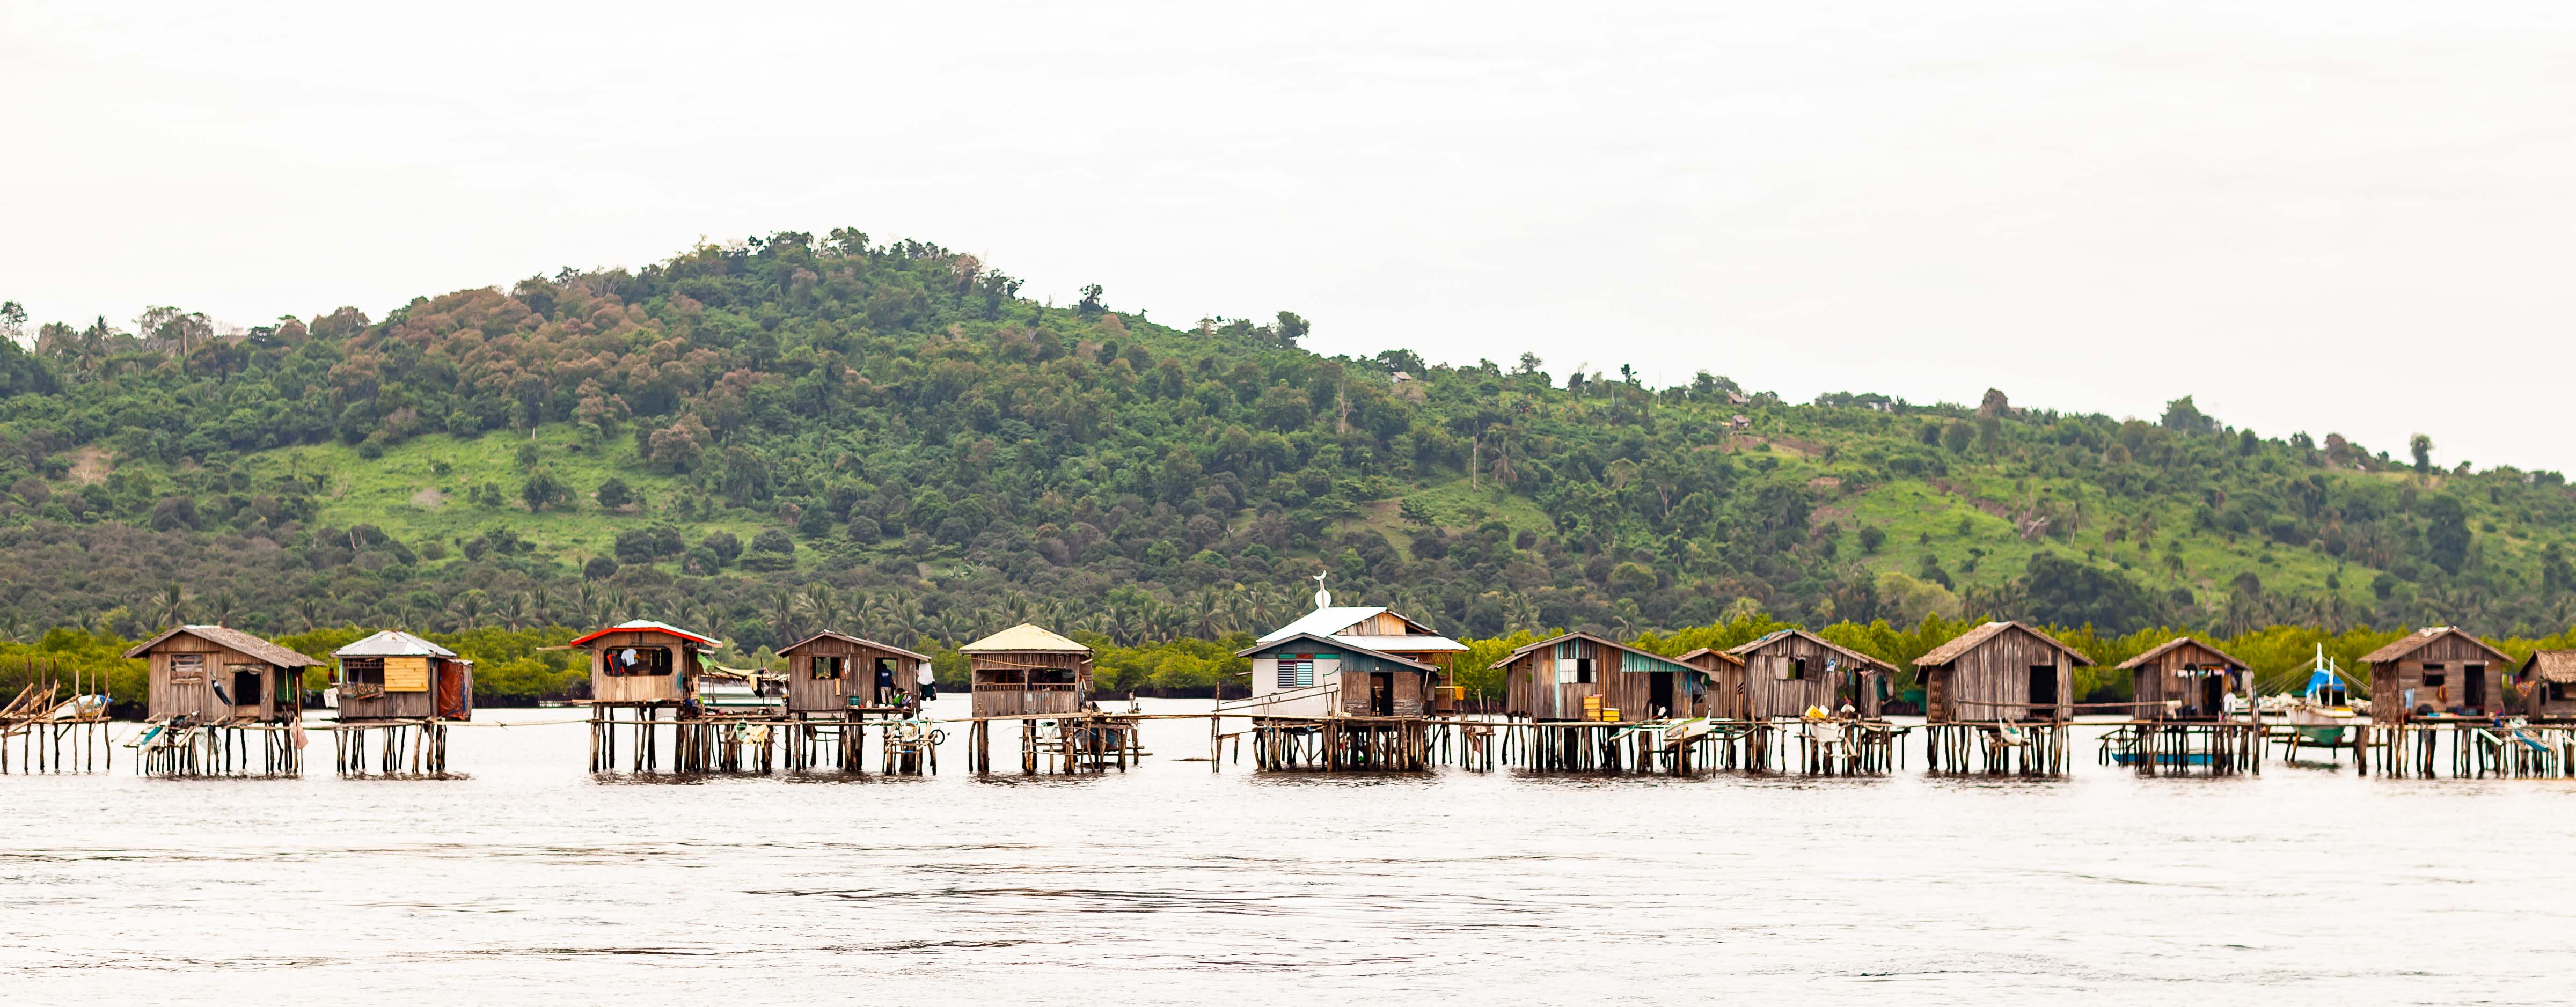 Philippines, Basilan Prov, Houses On Water, 2011, IMG 7882